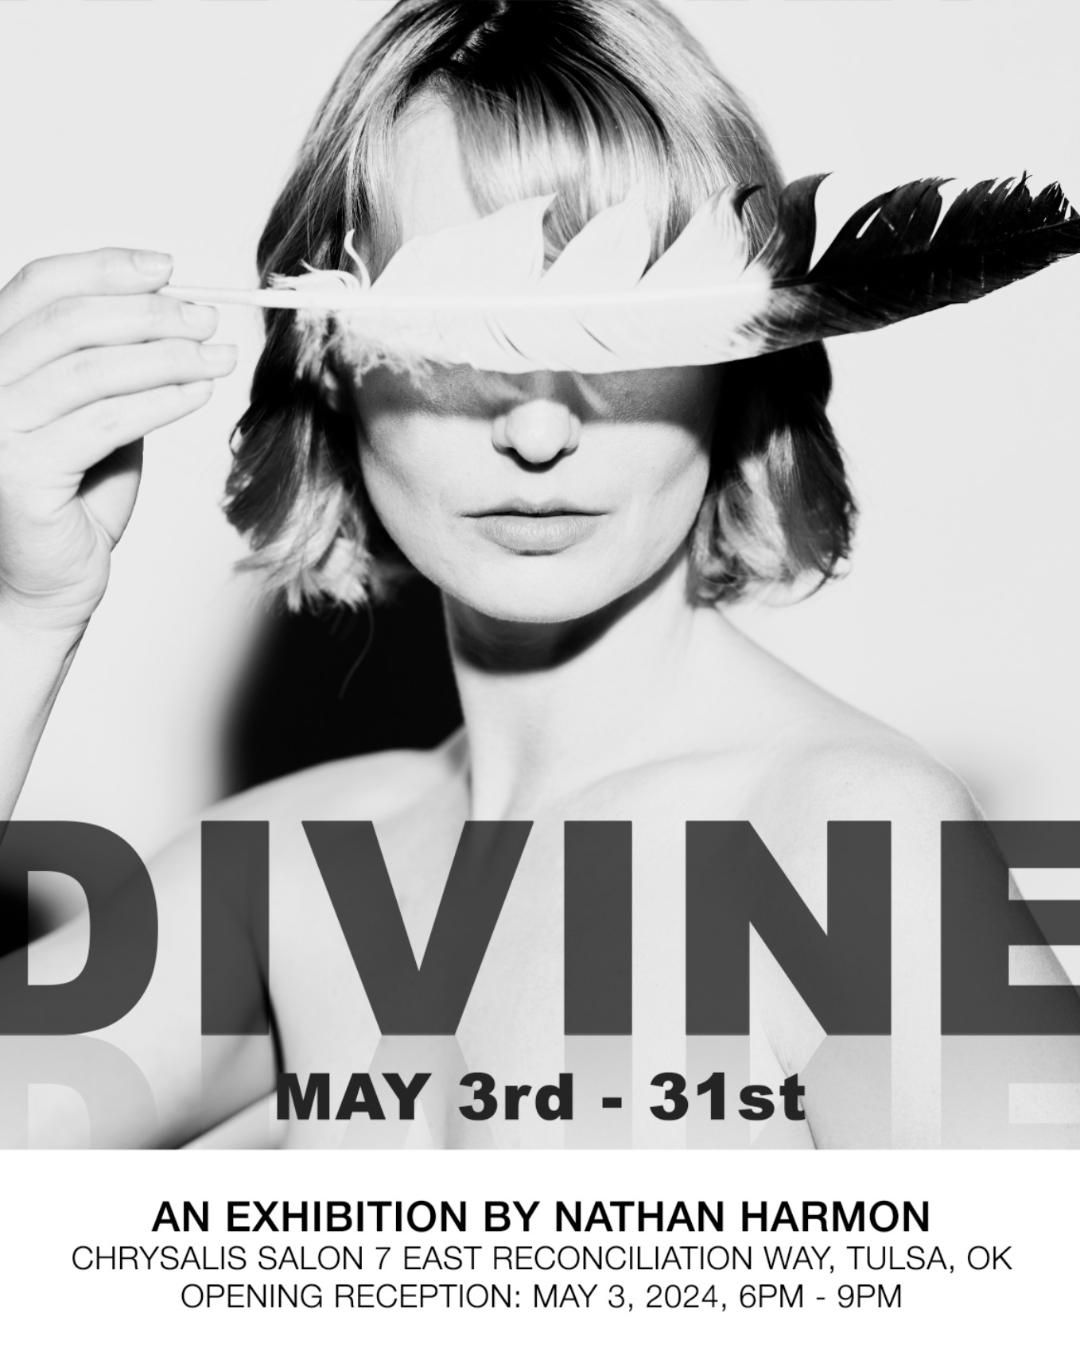 DIVINE - An Exhibition by NATHAN HARMON